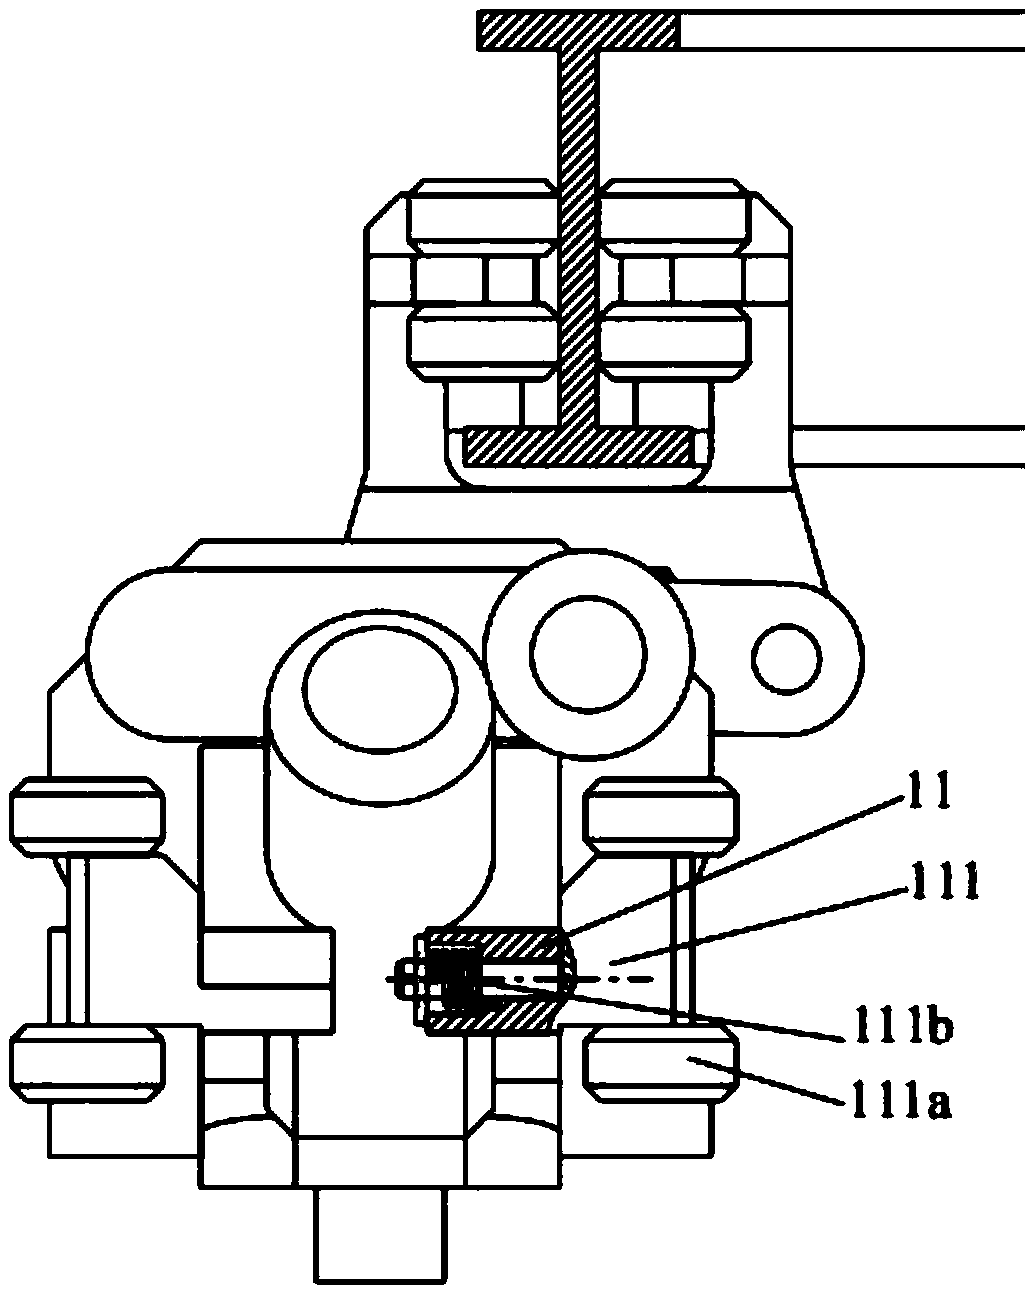 Suspended type double-drive track changing system and track thereof